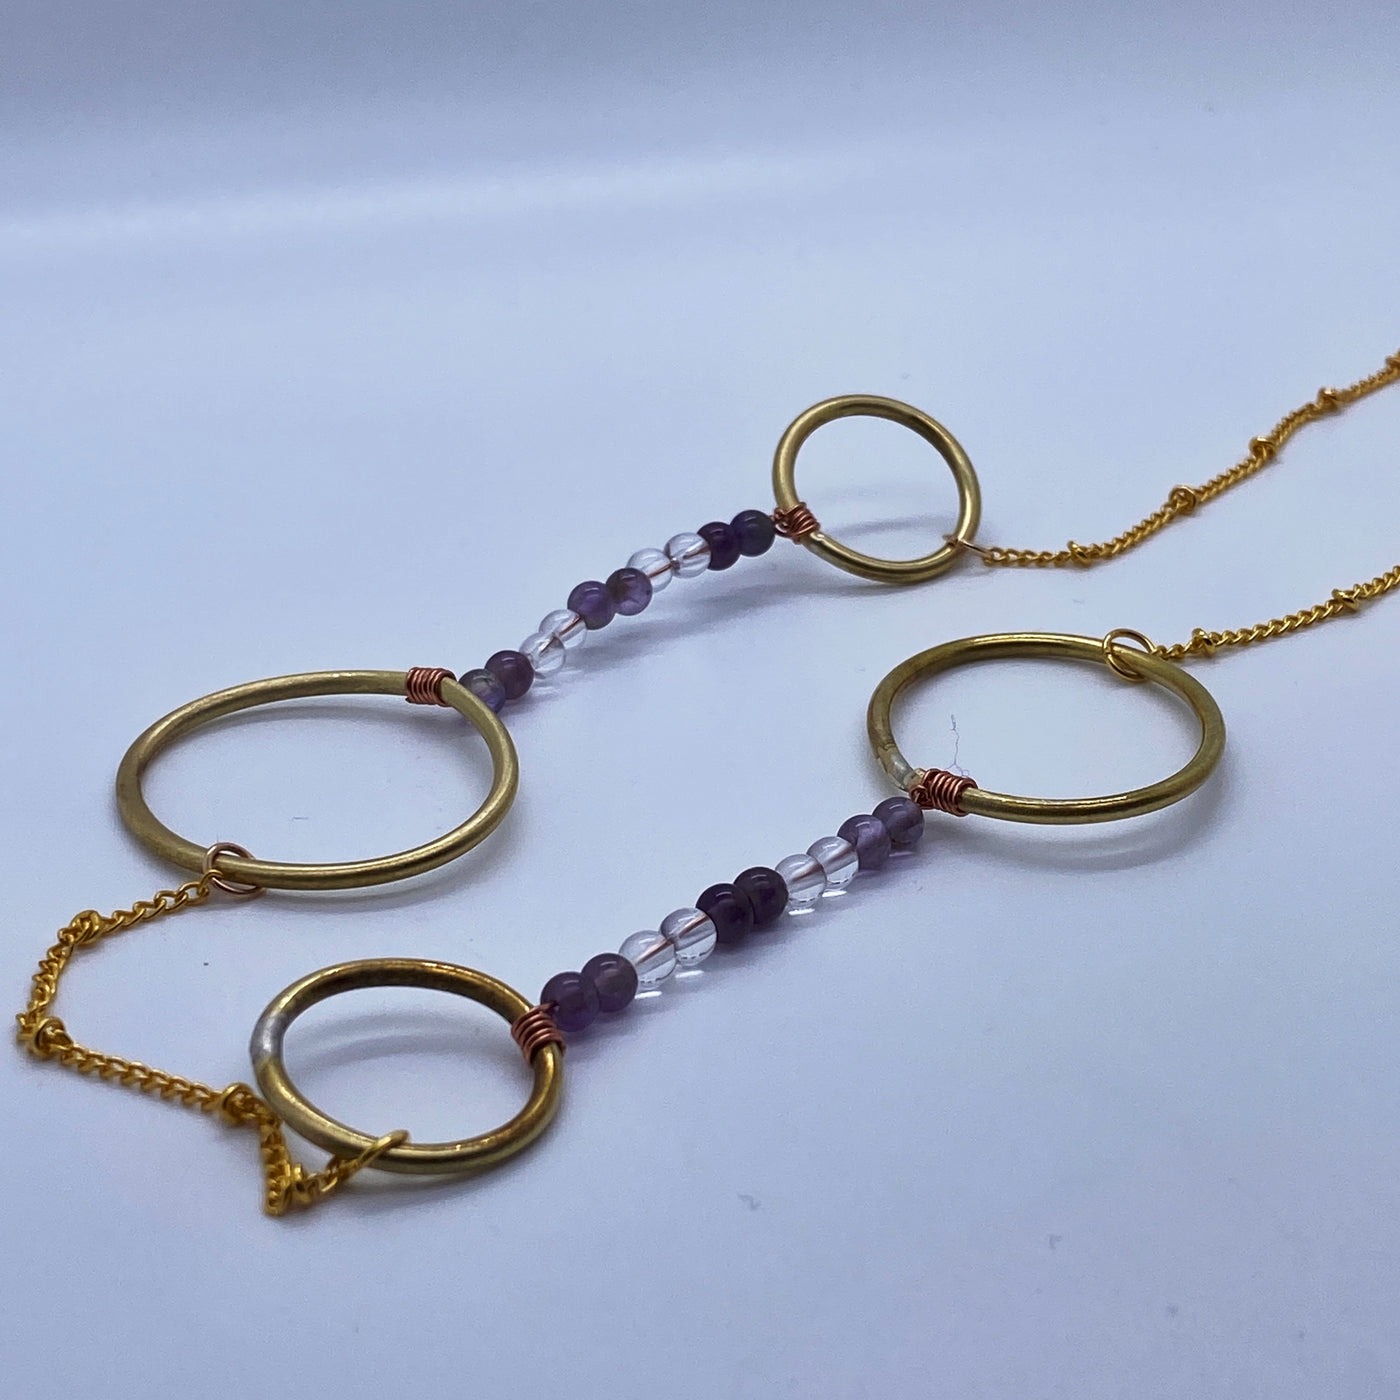 Long necklace: brass circles and ovals, amethysts and quartz